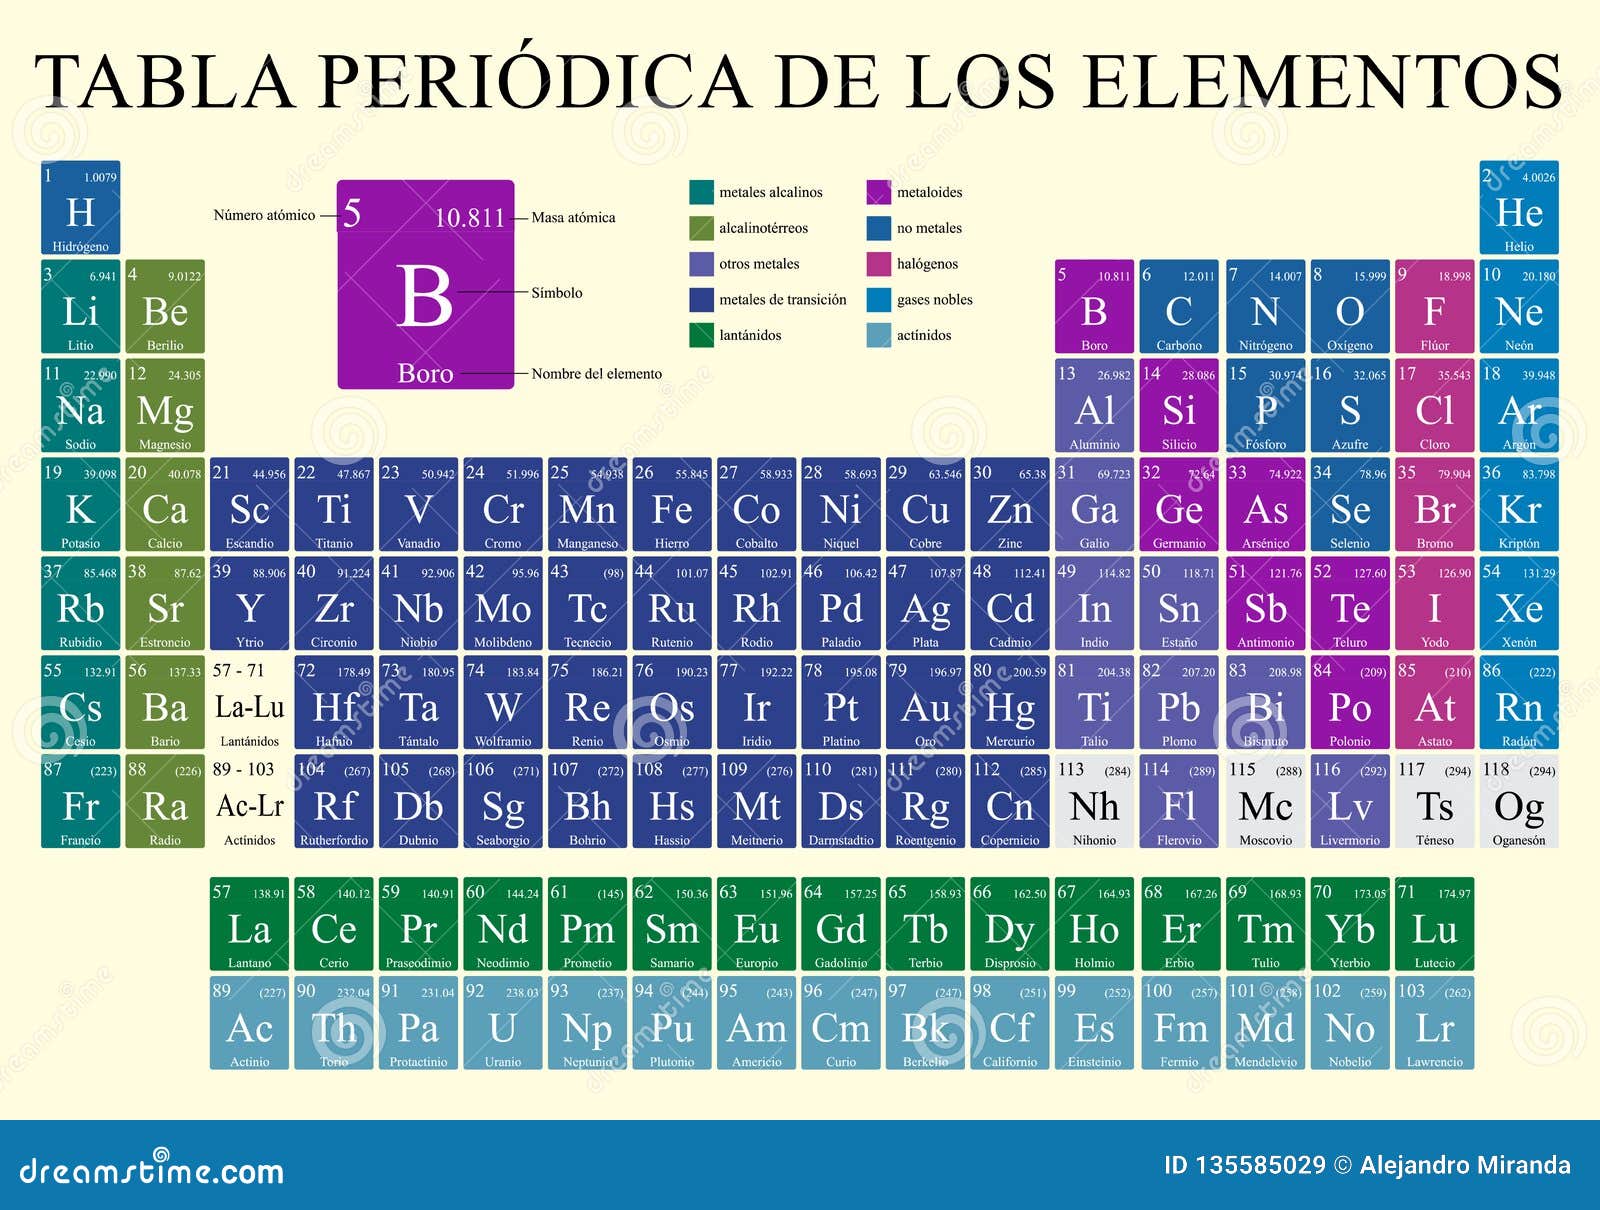 tabla periodica de los os -periodic table of s in spanish language- in full color with the 4 new s included